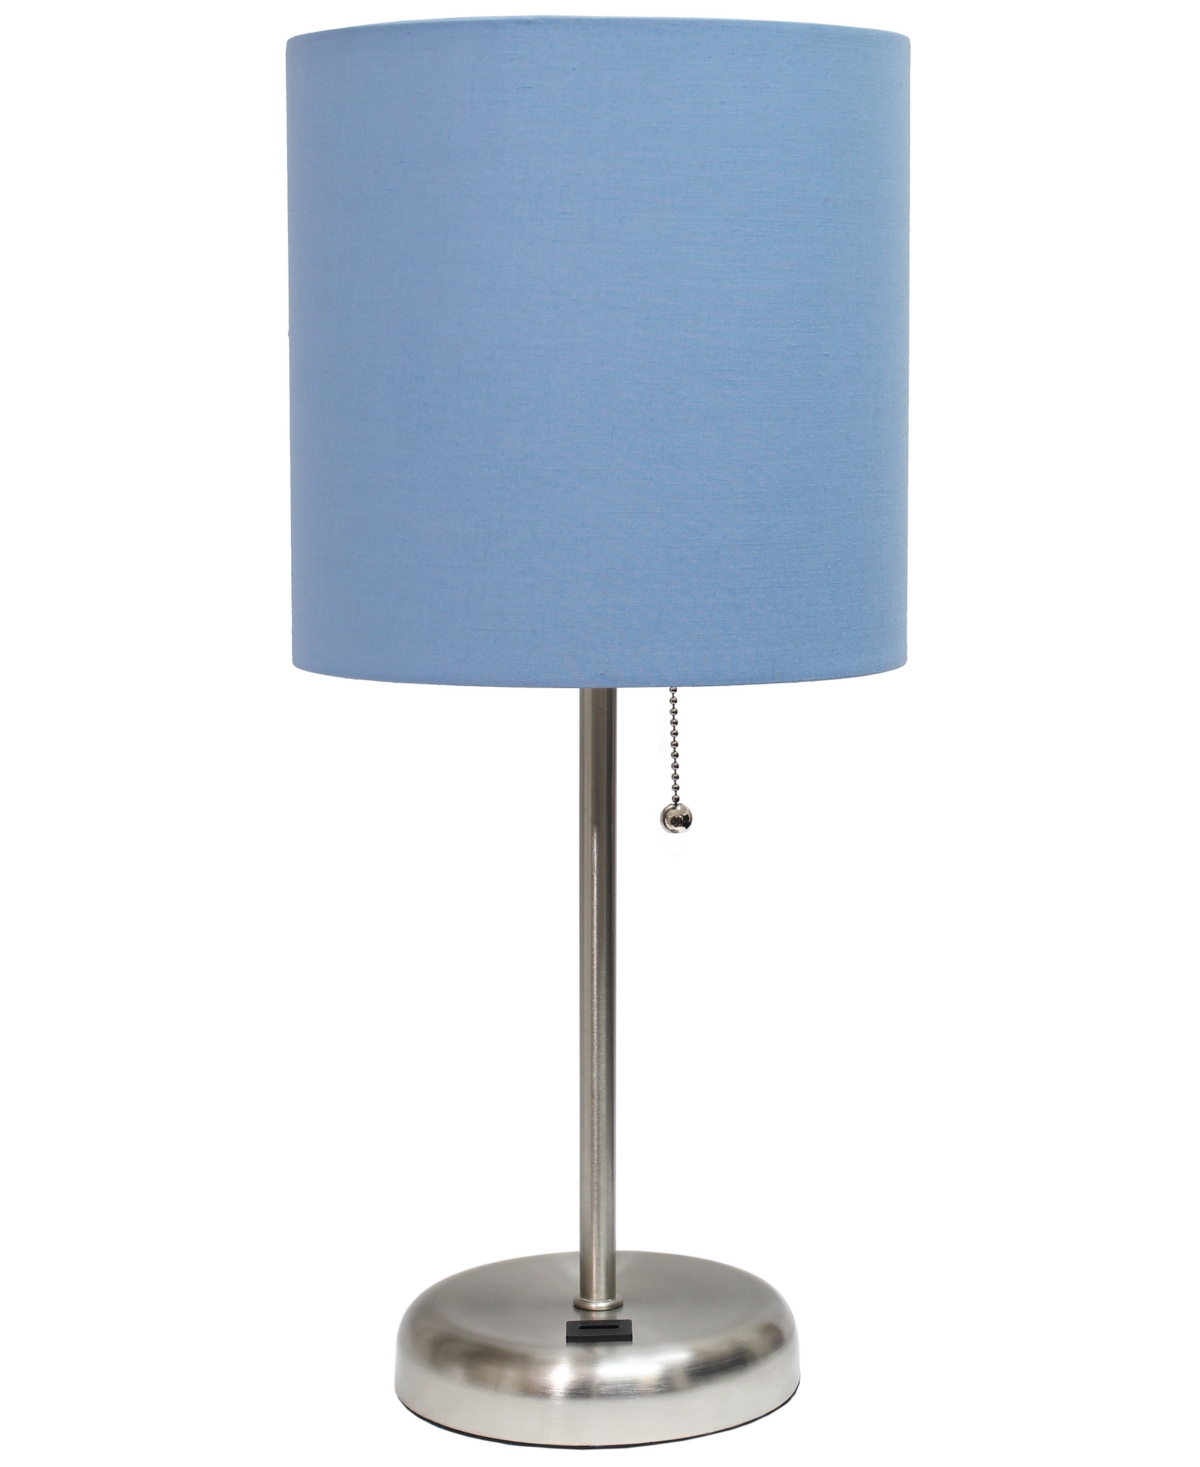 Limelights Stick Lamp With Usb Charging Port In Blue Shade,brushed Steel Base